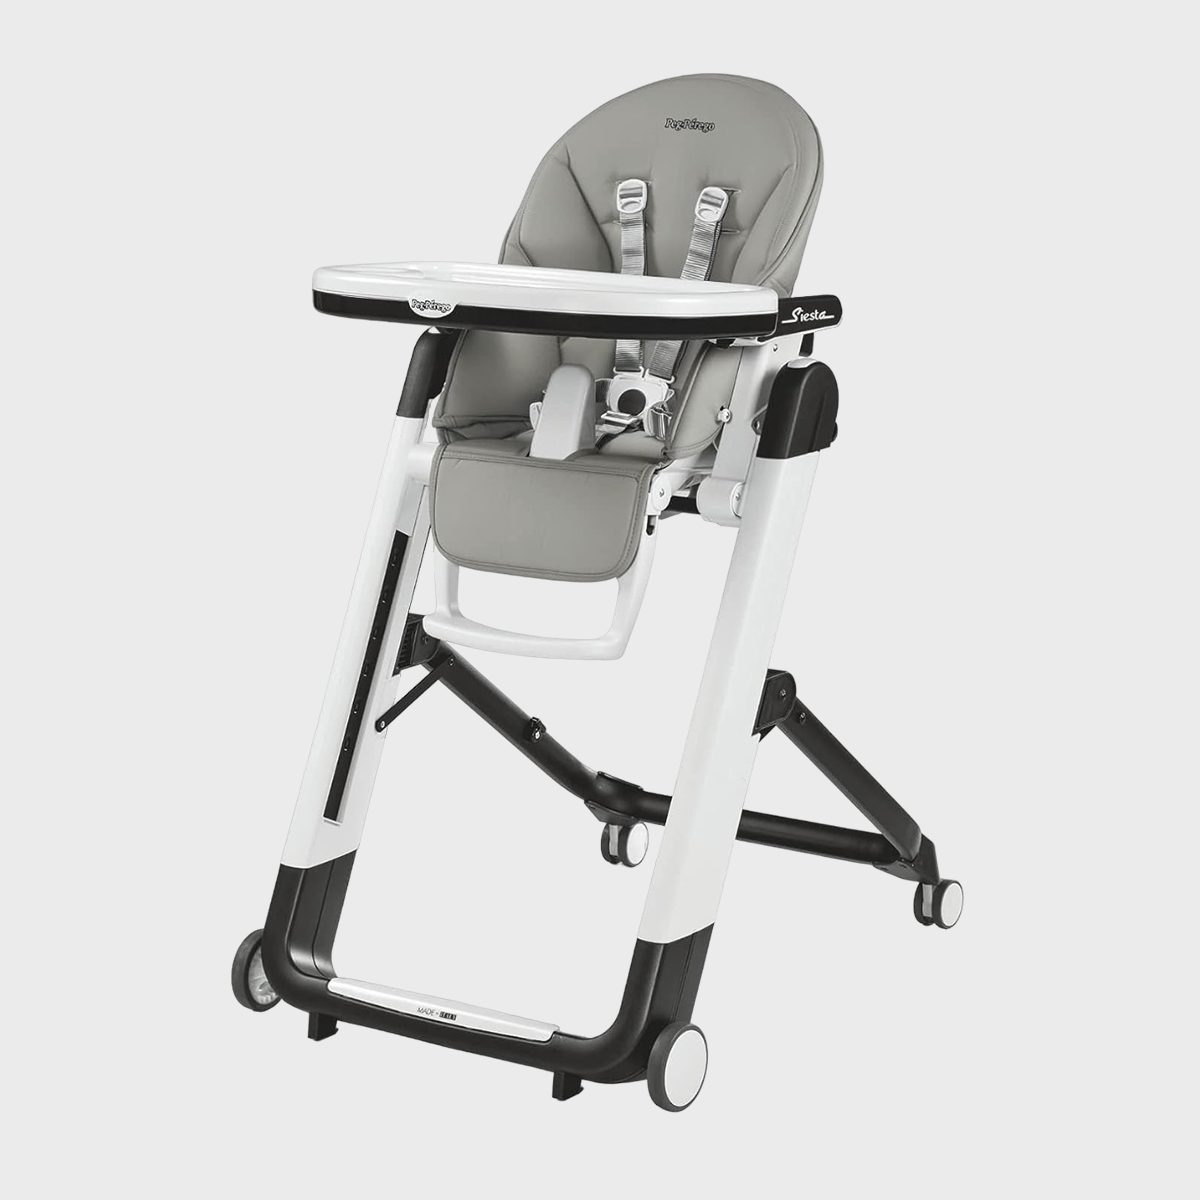 <p>Baby gear takes up a ton of space, so anything that is multifunctional or compact is a win. This <a href="https://www.amazon.com/Peg-Perego-Siesta-Ice-Grey/dp/B017TC3T6I" rel="noopener noreferrer">high chair</a> is both. It serves as a comfy recliner as well as a high chair with nine different height options, five reclining positions, and an adjustable footrest.</p> <p>And when the baby is finished eating their mashed veggies, simply fold the seat down and tuck it away until the next mealtime. It also features easy-to-clean <a href="https://www.rd.com/article/how-to-clean-leather/">leather upholstery</a>, a dishwasher-safe tray and a storage net on the back of the seat that's perfect for stashing clean bibs.</p> <p class="listicle-page__cta-button-shop"><a class="shop-btn" href="https://www.amazon.com/Peg-Perego-Siesta-Ice-Grey/dp/B017TC3T6I">Shop Now</a></p>